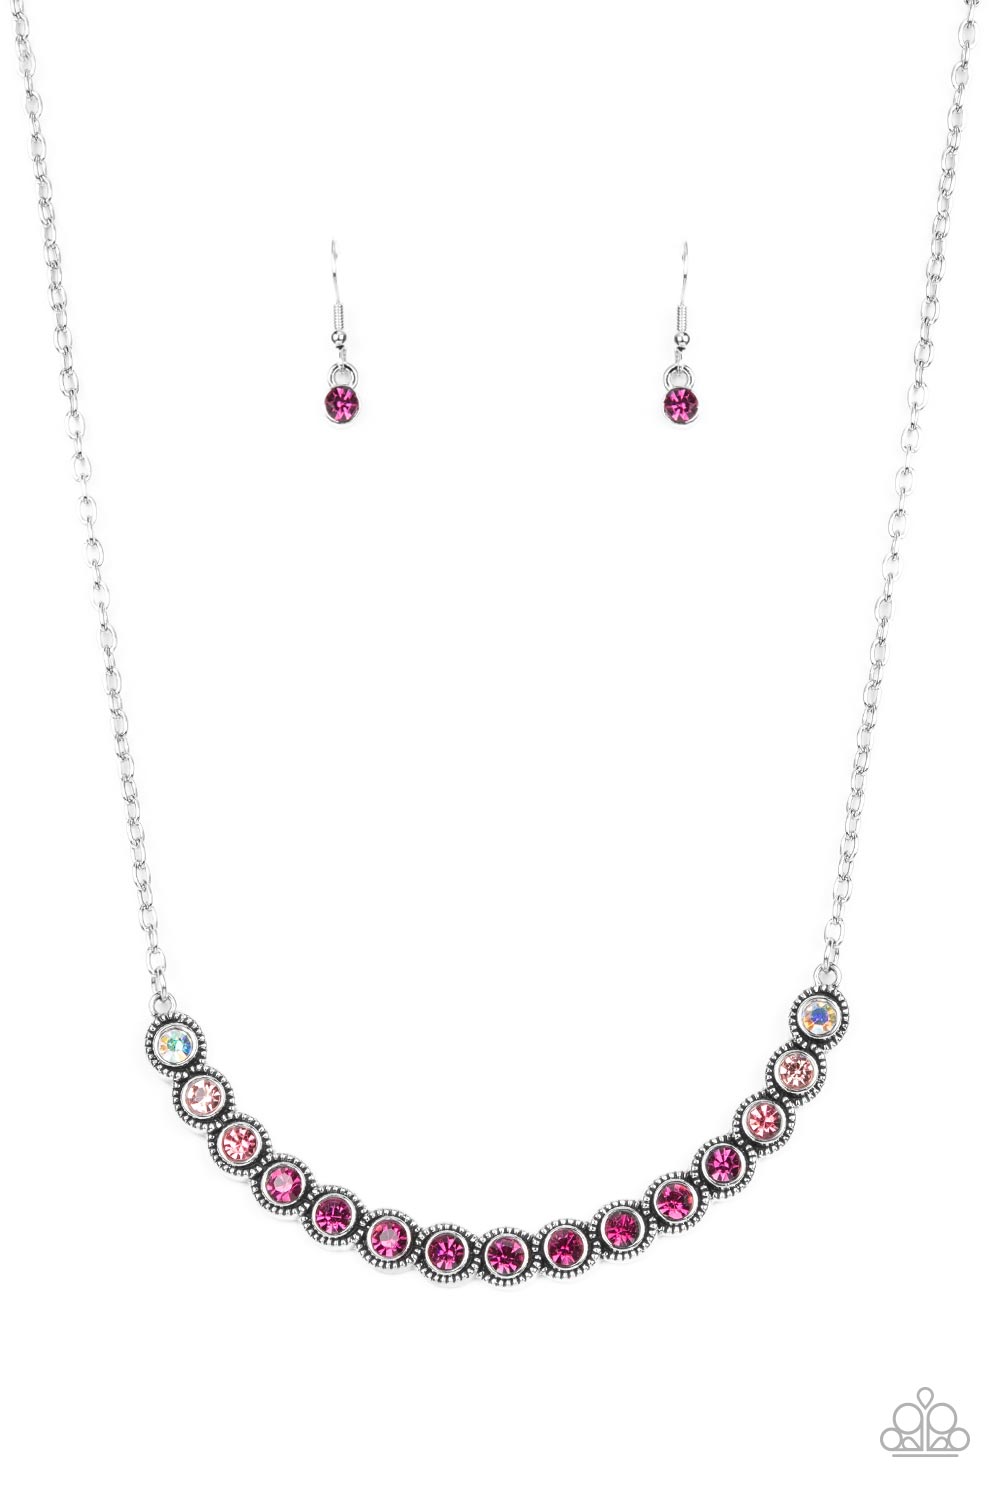 Paparazzi -Throwing SHADES - Pink Iridescent Necklace - Alies Bling Bar